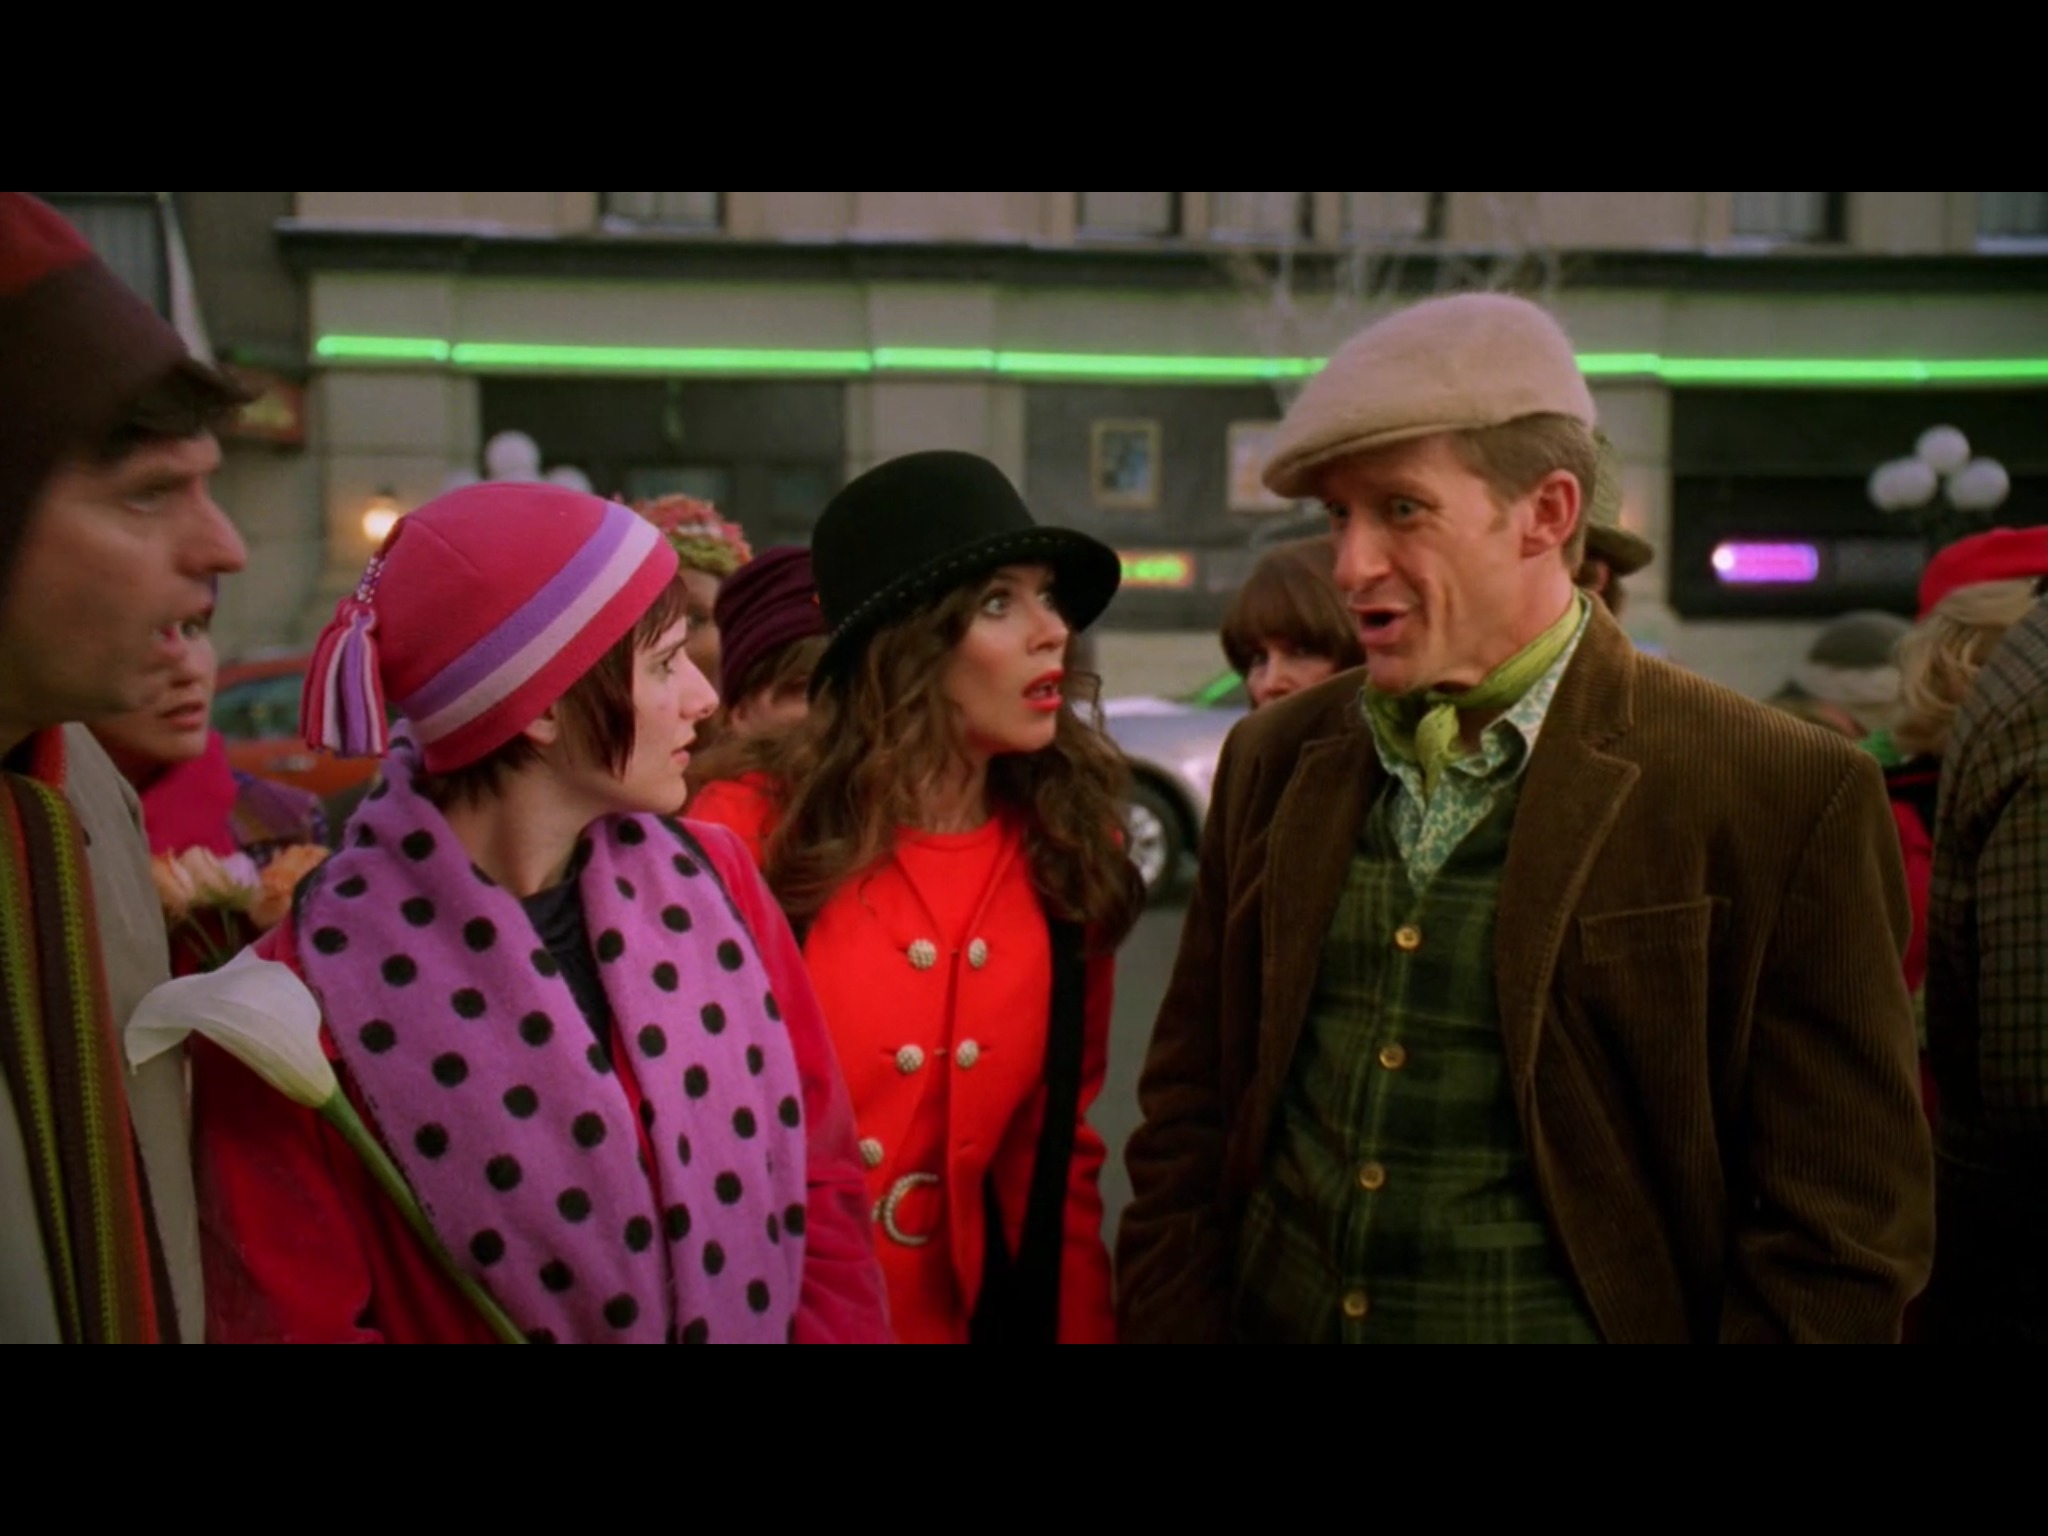 Anna Friel (L) and John Cantwell (R) on an episode of PUSHING DAISIES titled 